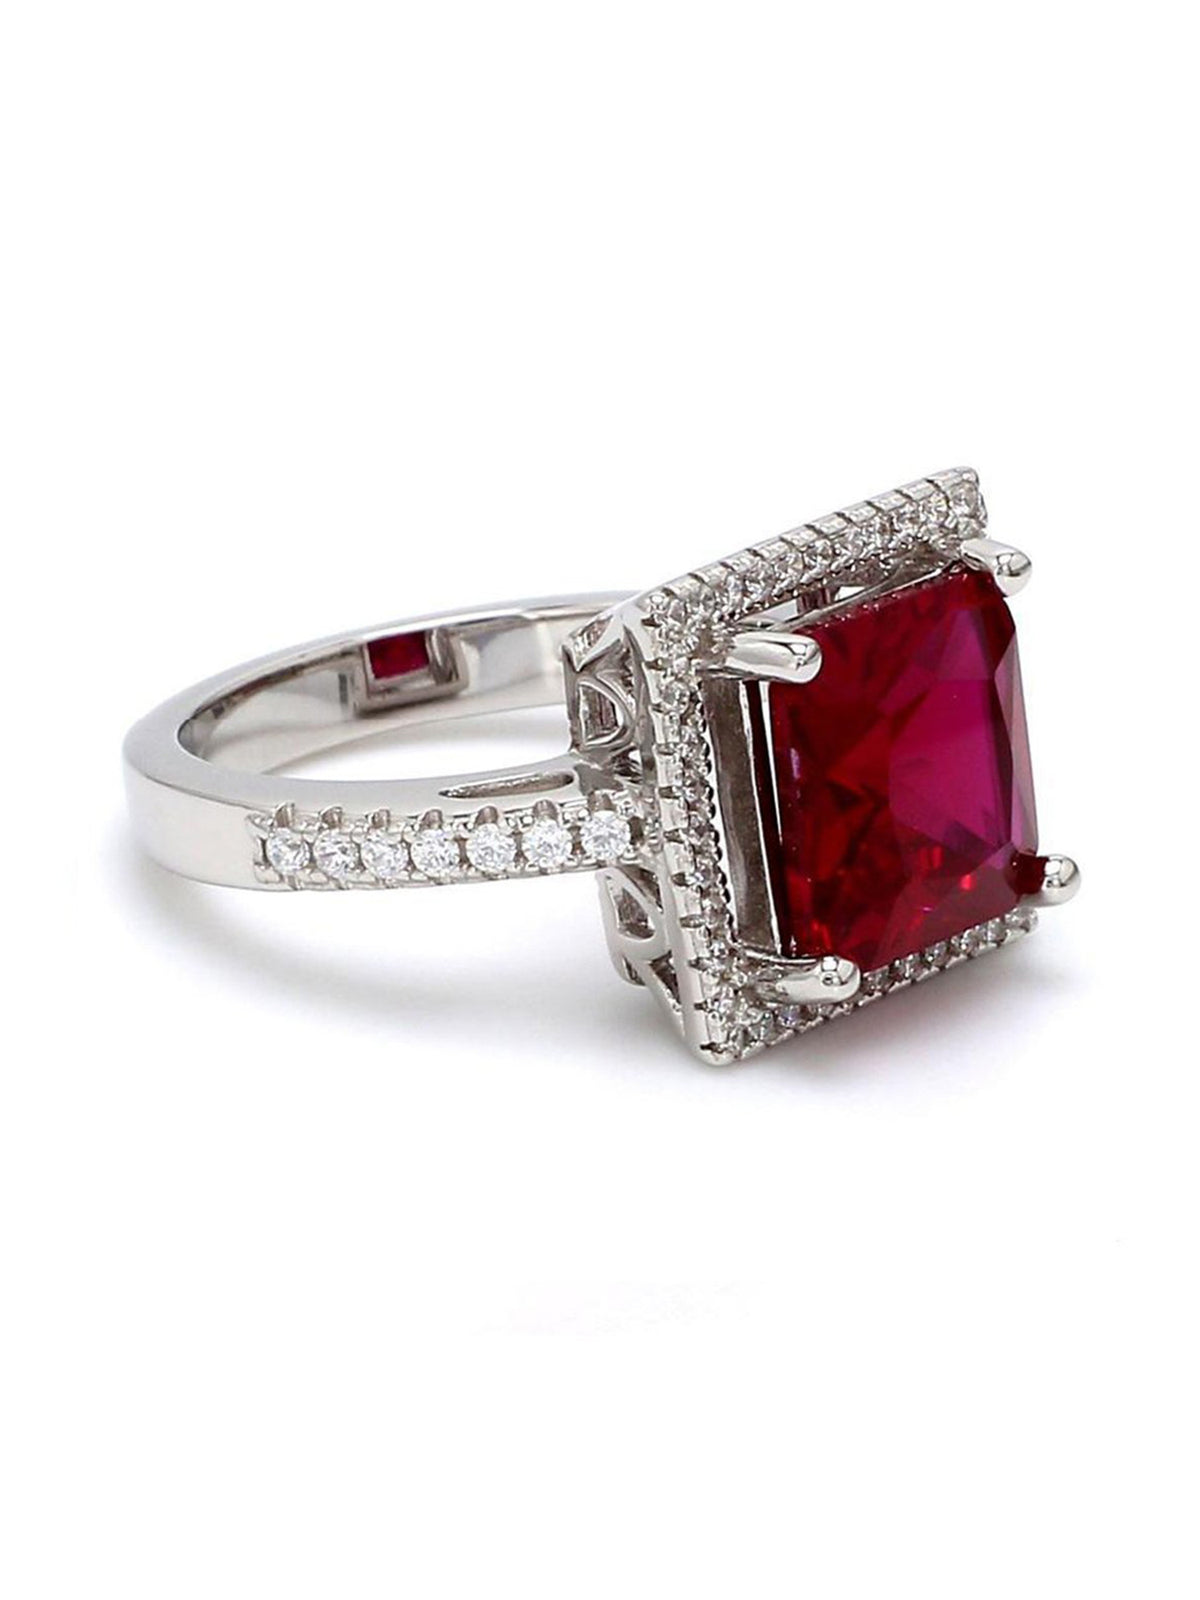 PRINCESS PARTY RUBY RING IN SILVER-6